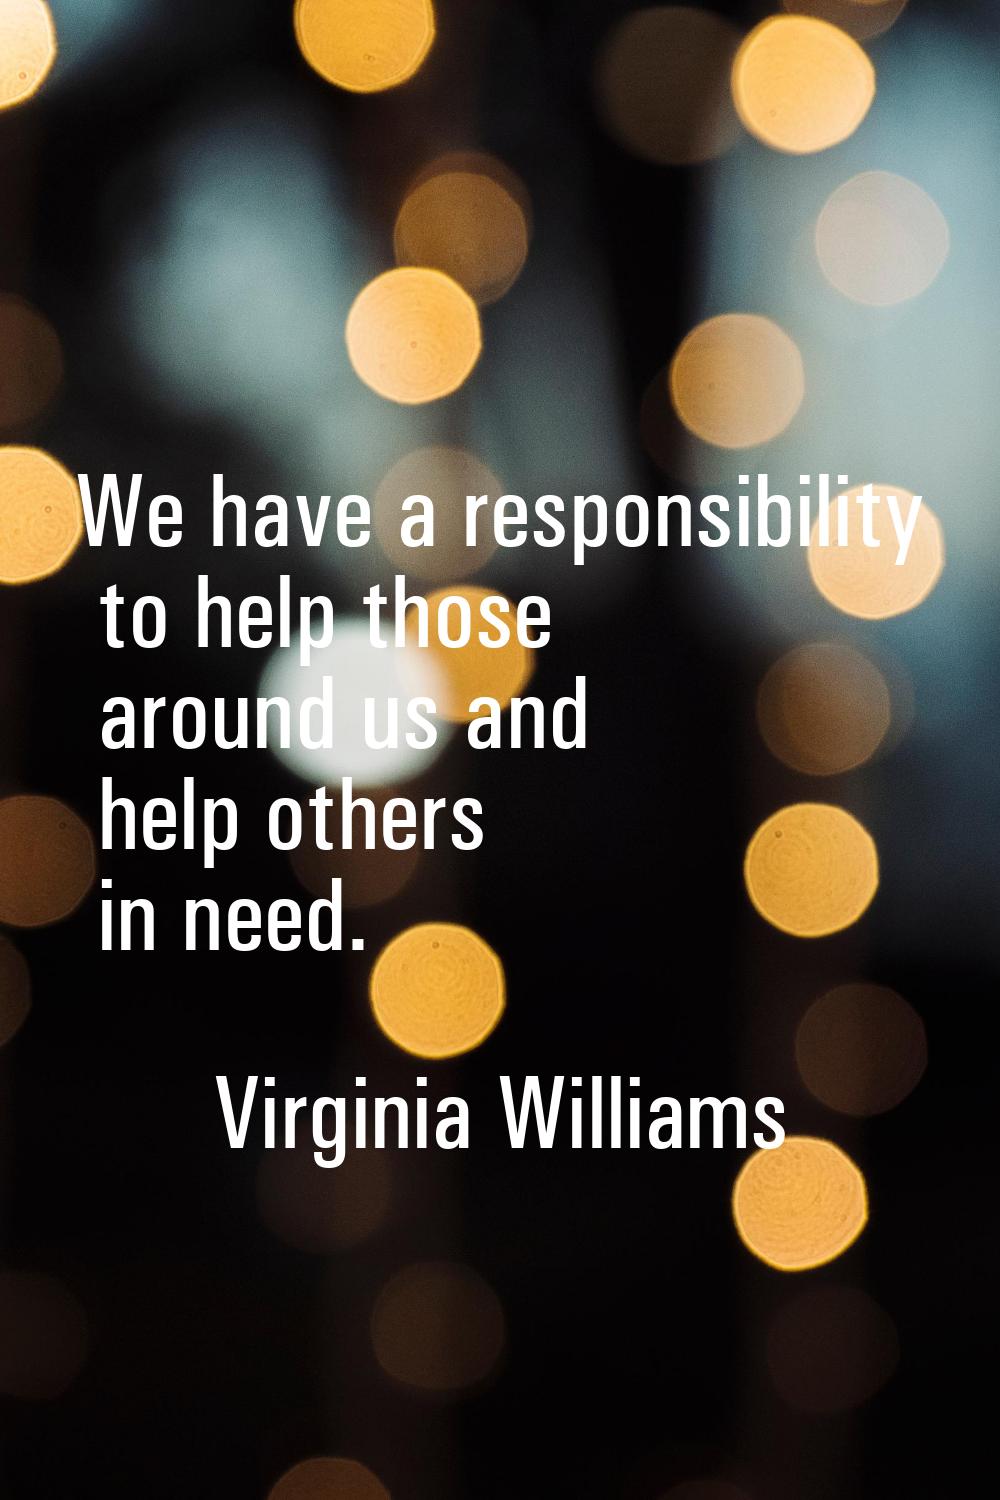 We have a responsibility to help those around us and help others in need.